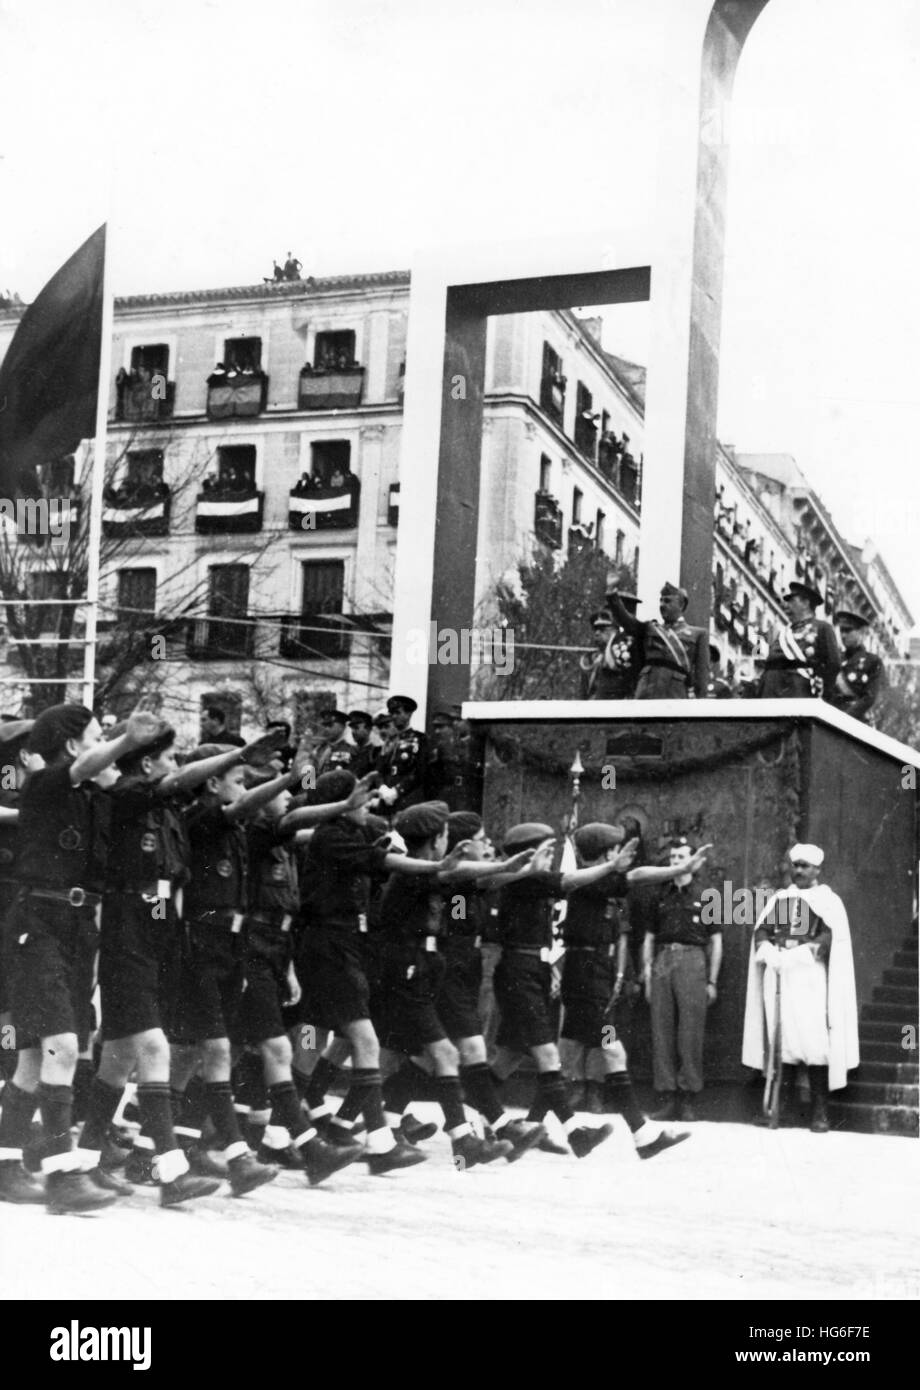 The Nazi propaganda picture shows the march of the fascist Falange Youth Movement in front of Spanish dictator Francisco Franco on a parade honoring the fourth anniversary of the victory of Francos troops during the Spanish Civil War. The photo was taken in Madrid, Spain, April 1940. Fotoarchiv für Zeitgeschichtee - NO WIRE SERVICE - | usage worldwide Stock Photo